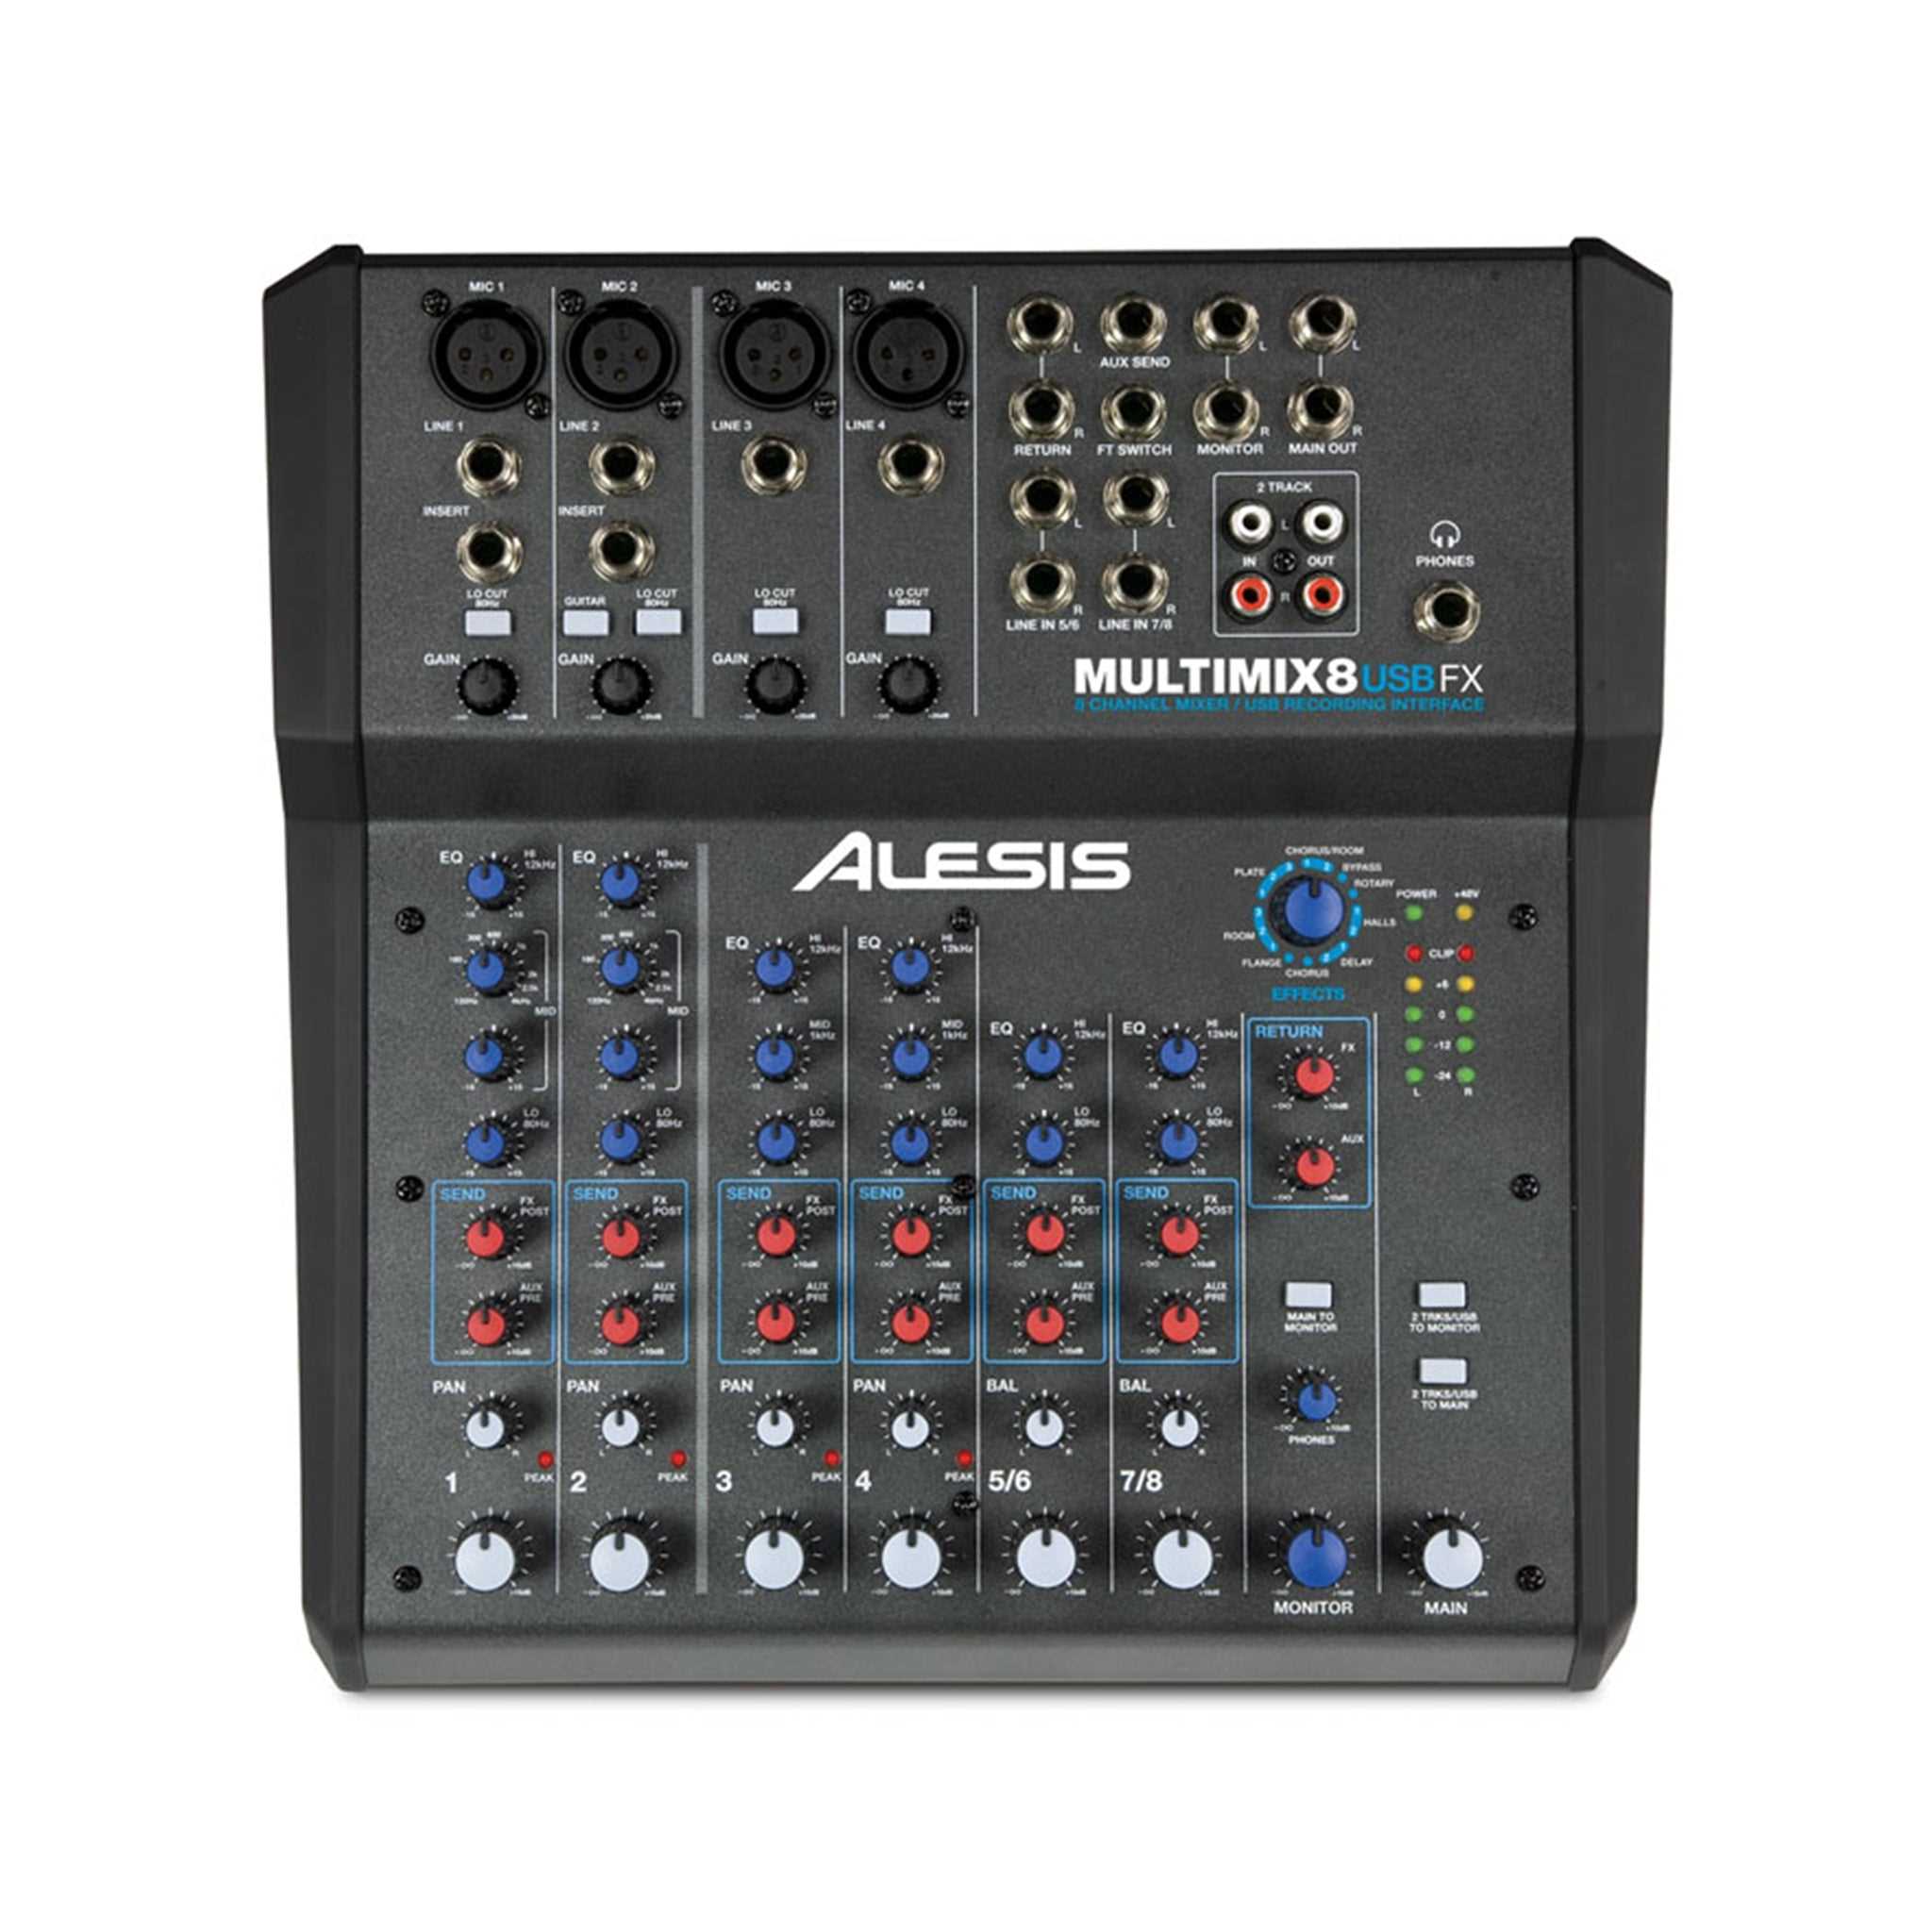 Alesis MultiMix 8 USB FX 8-channel Mixer with Effects and USB Audio Interface | Zoso Music Sdn Bhd